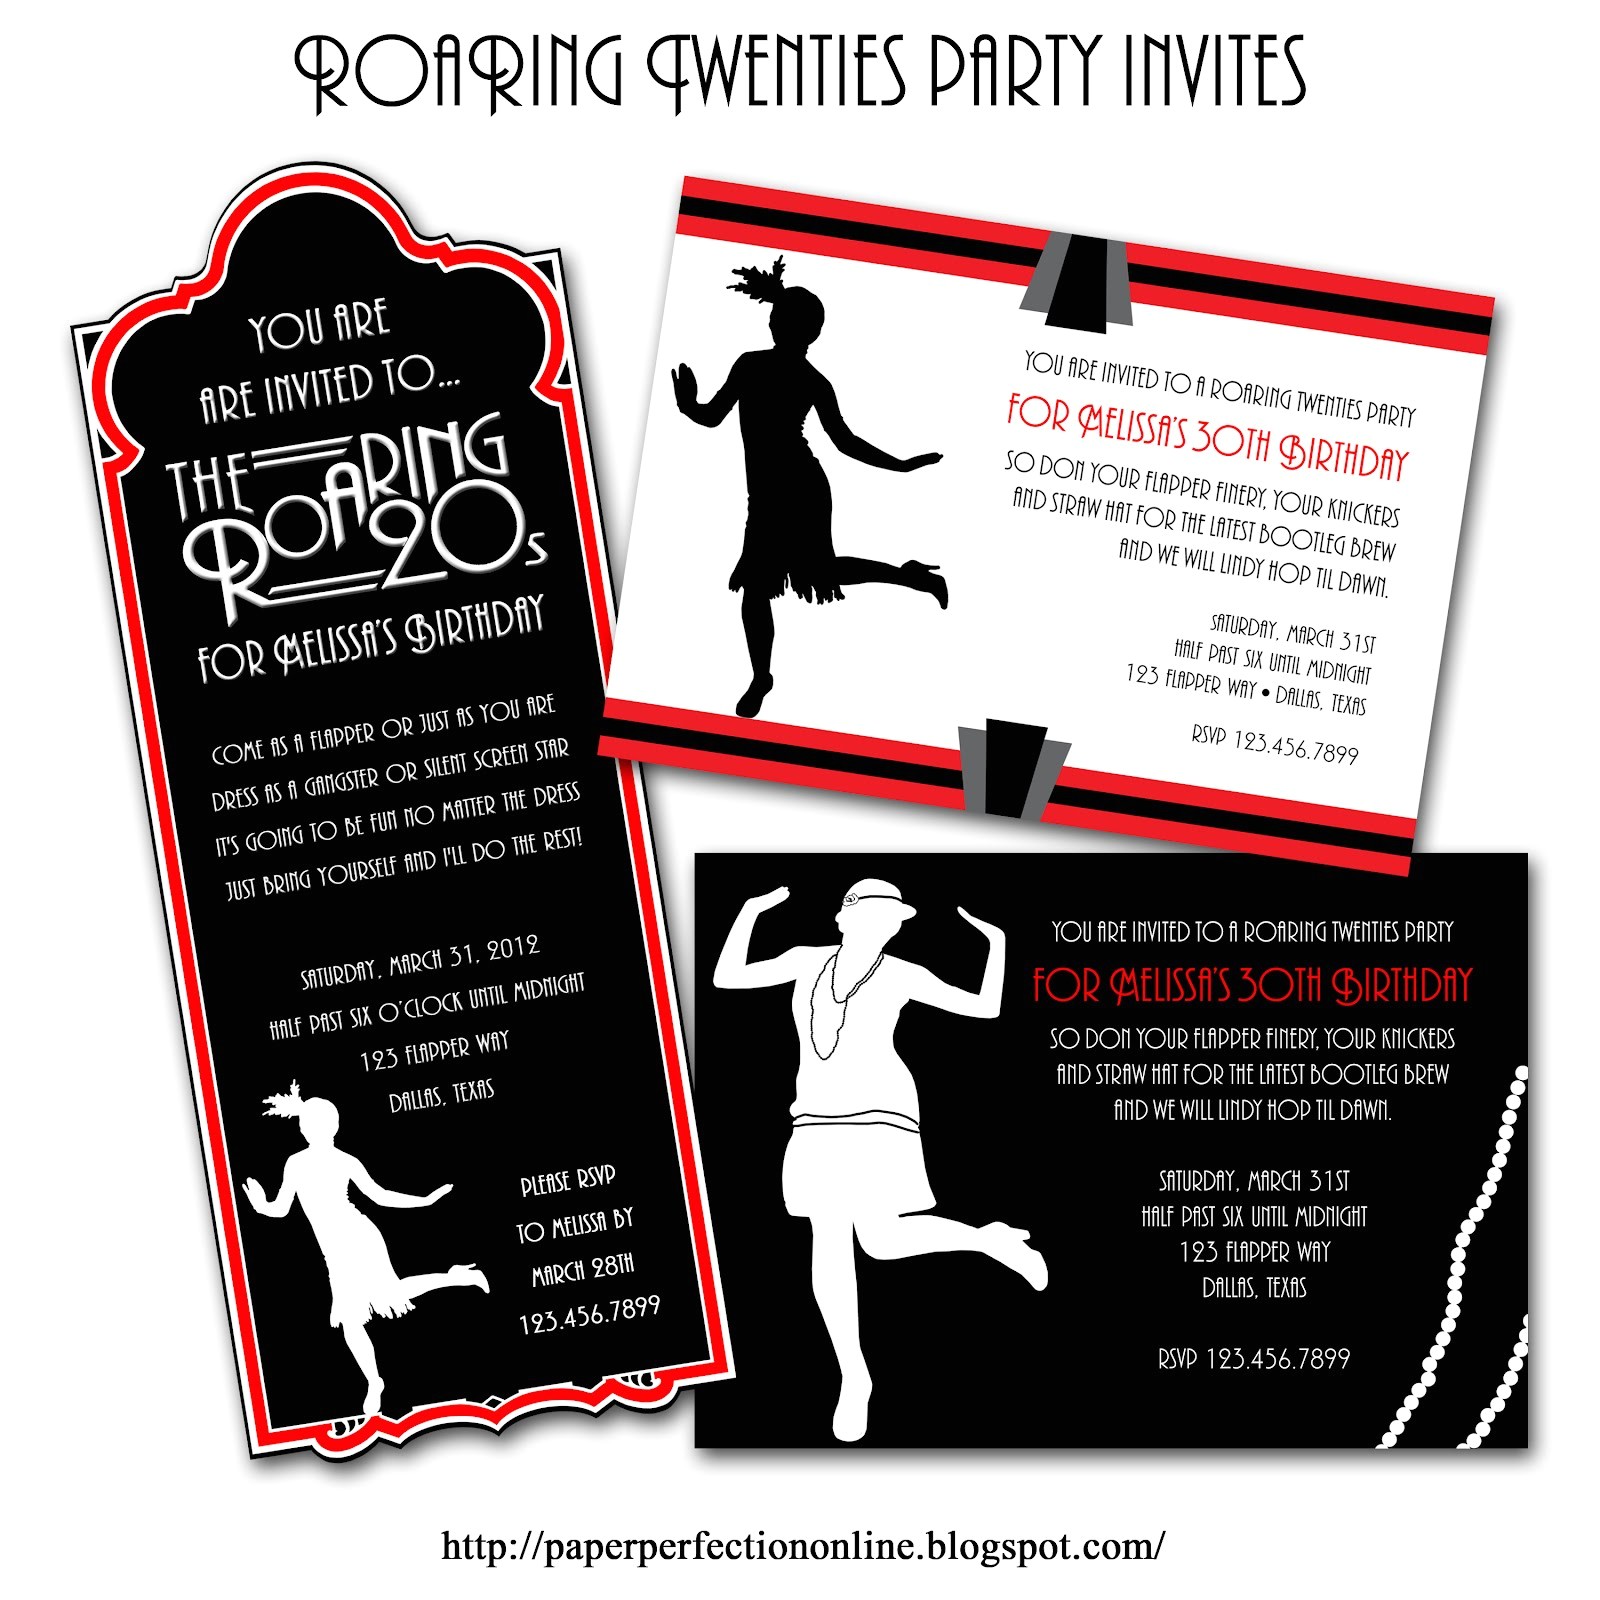 1920s Slang for Party Invitations Speakeasy Prohibition theme On Pinterest